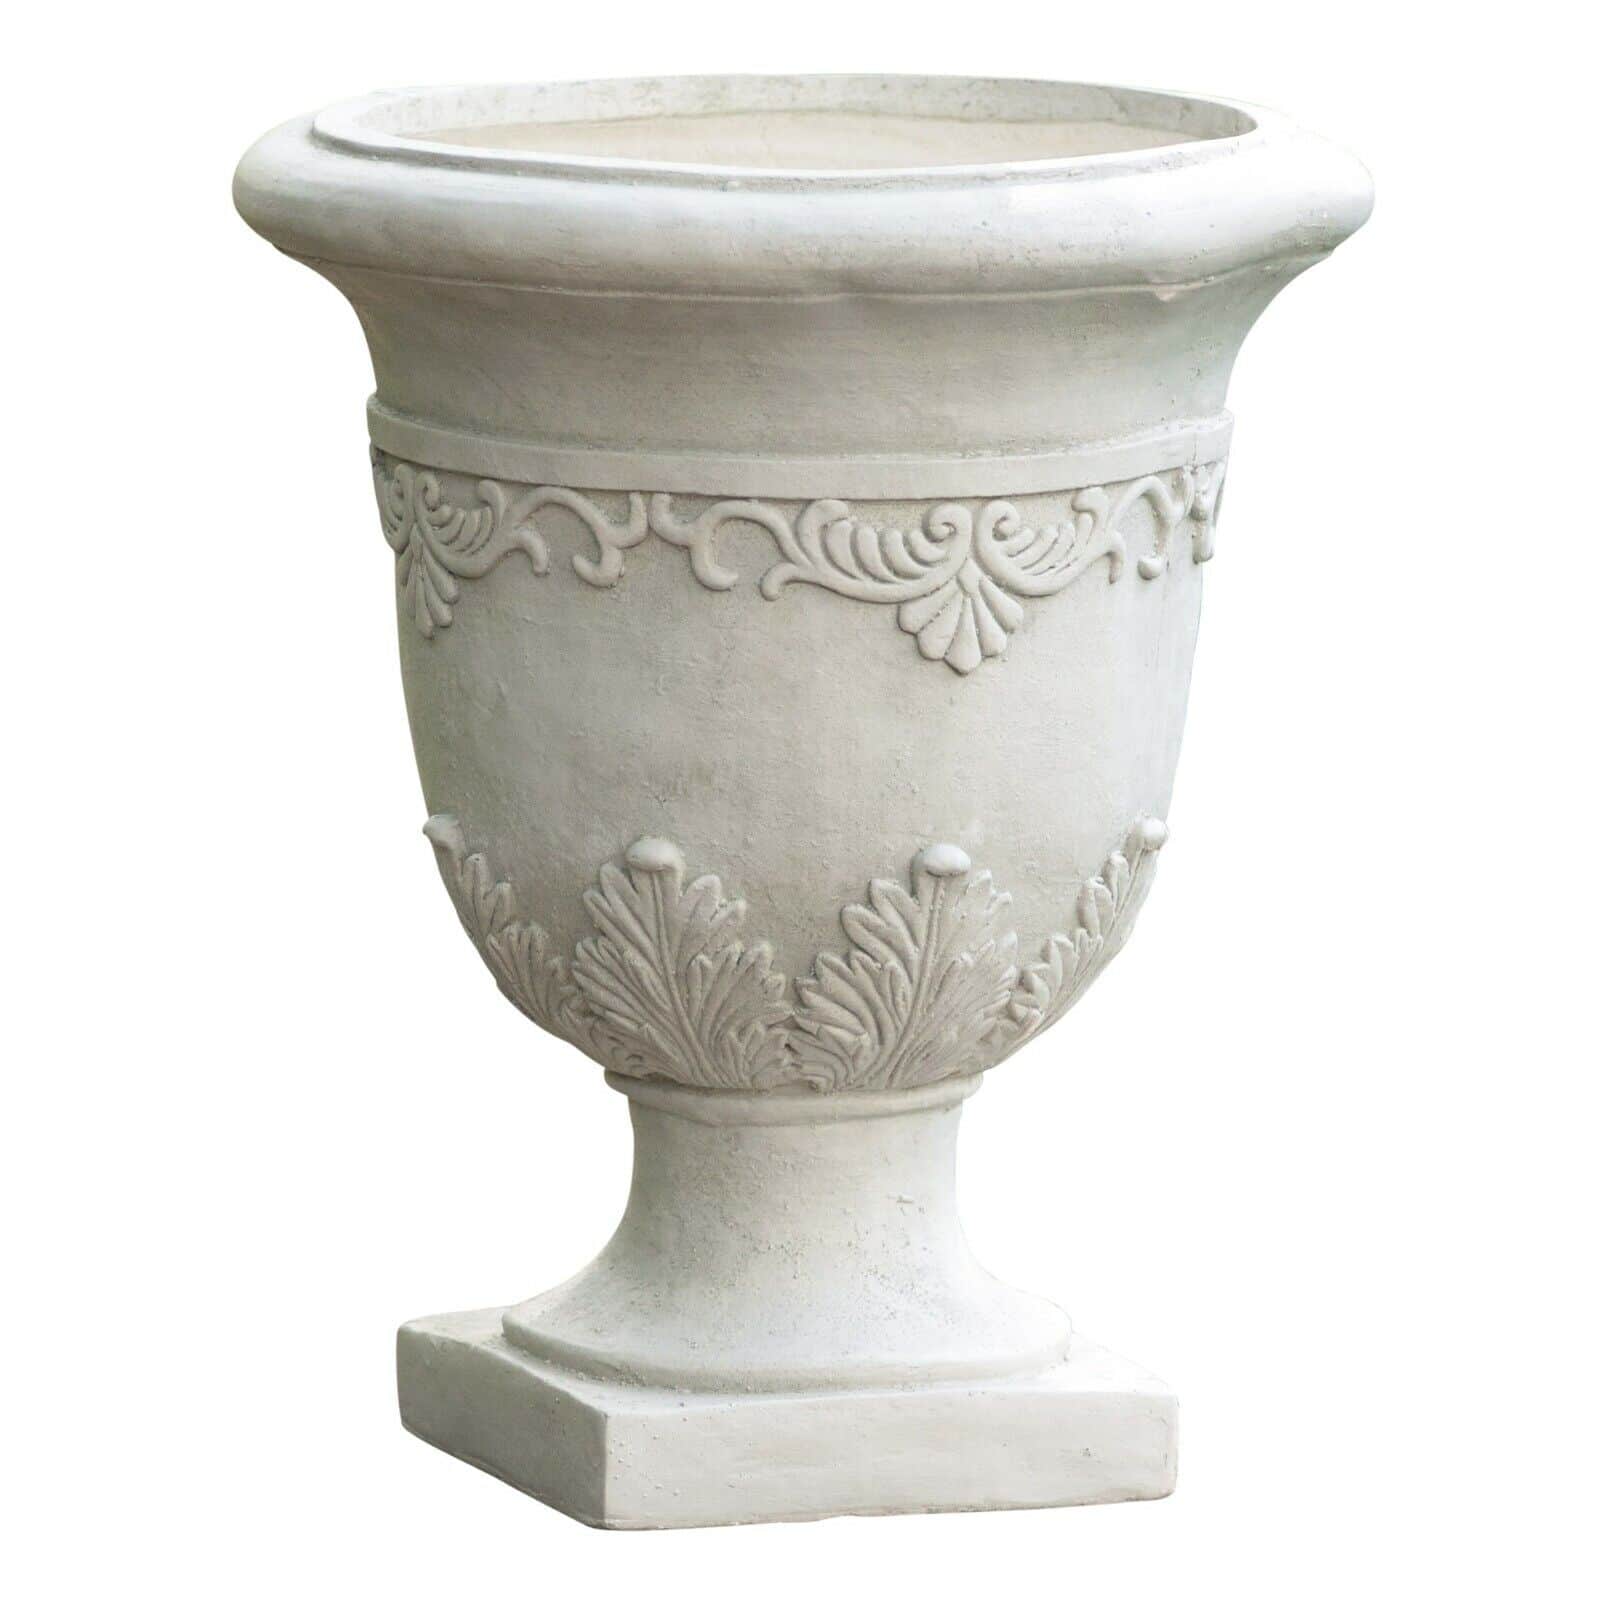 A white urn on a white background.